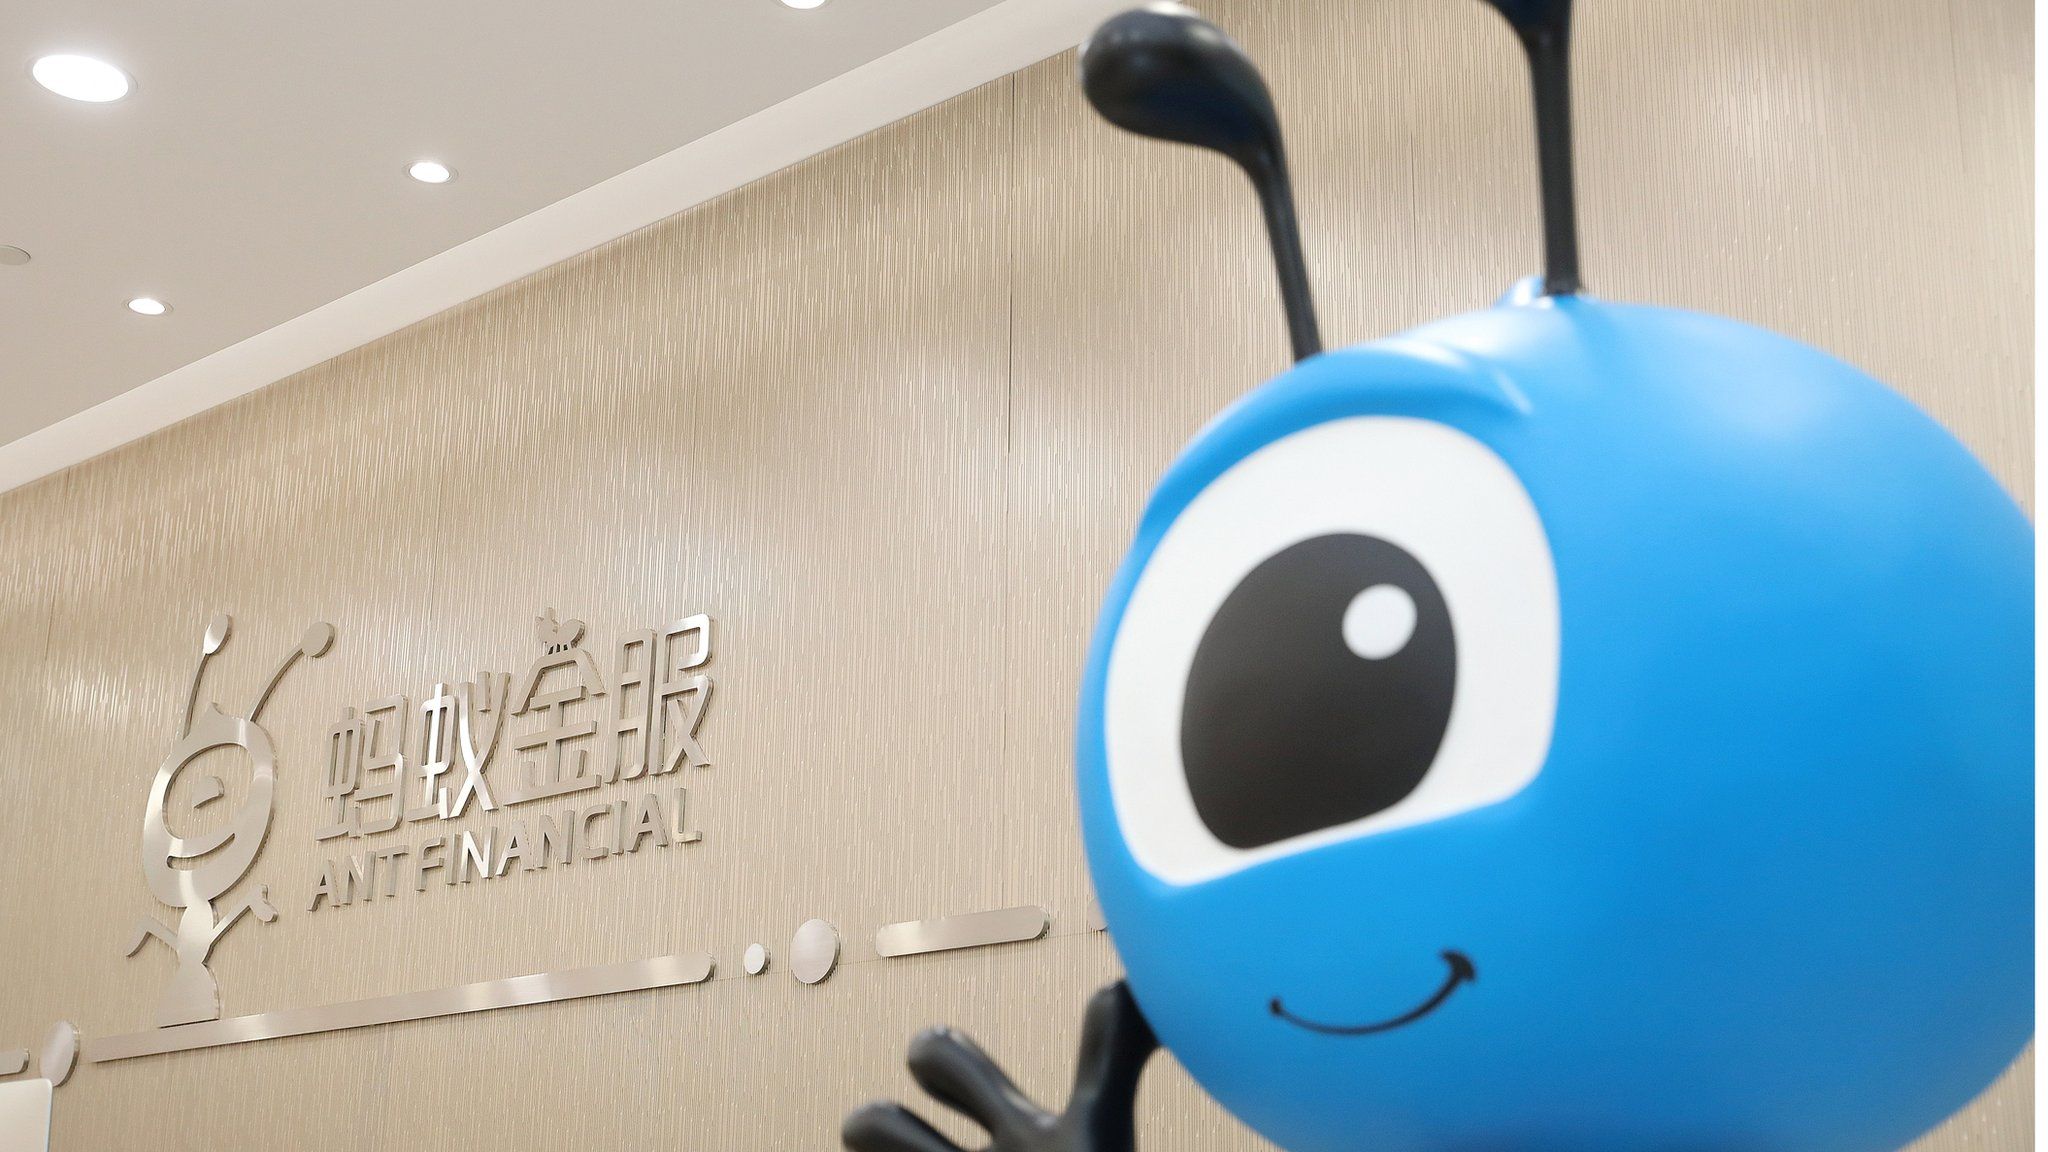 Chinese financial technology group Ant has unveiled plans for a stock market debut.